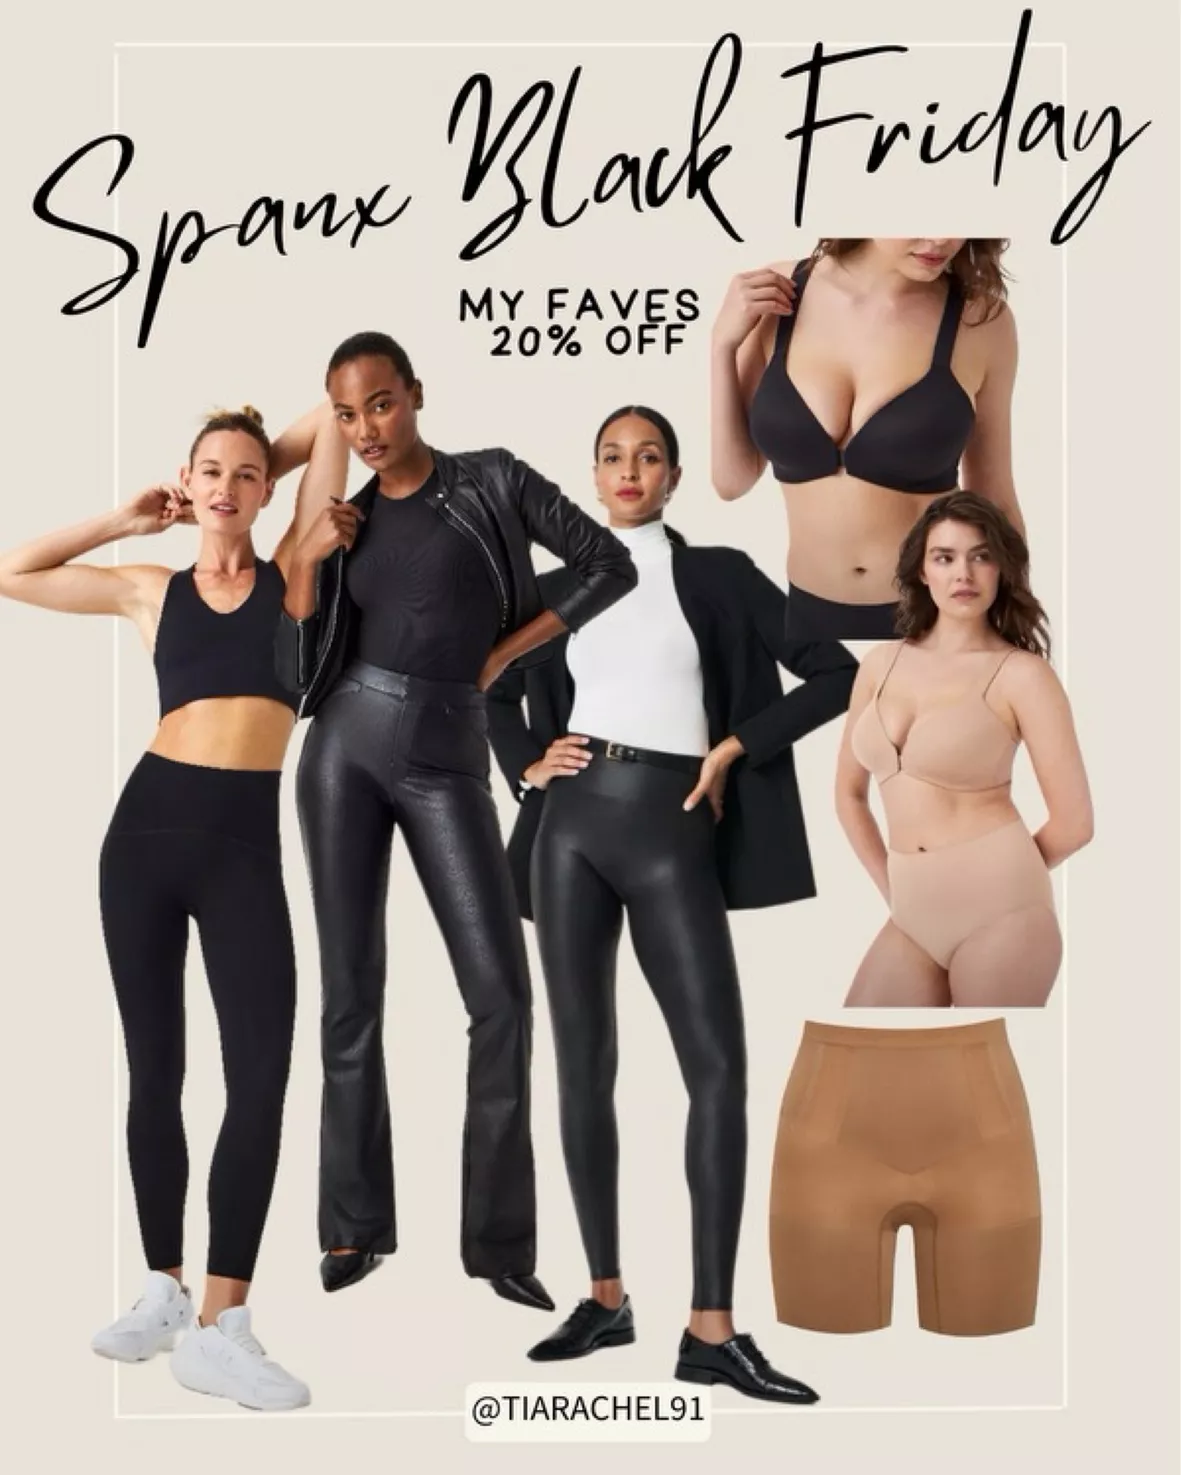 Abercrombie, Spanx and more still have Black Friday clothing deals